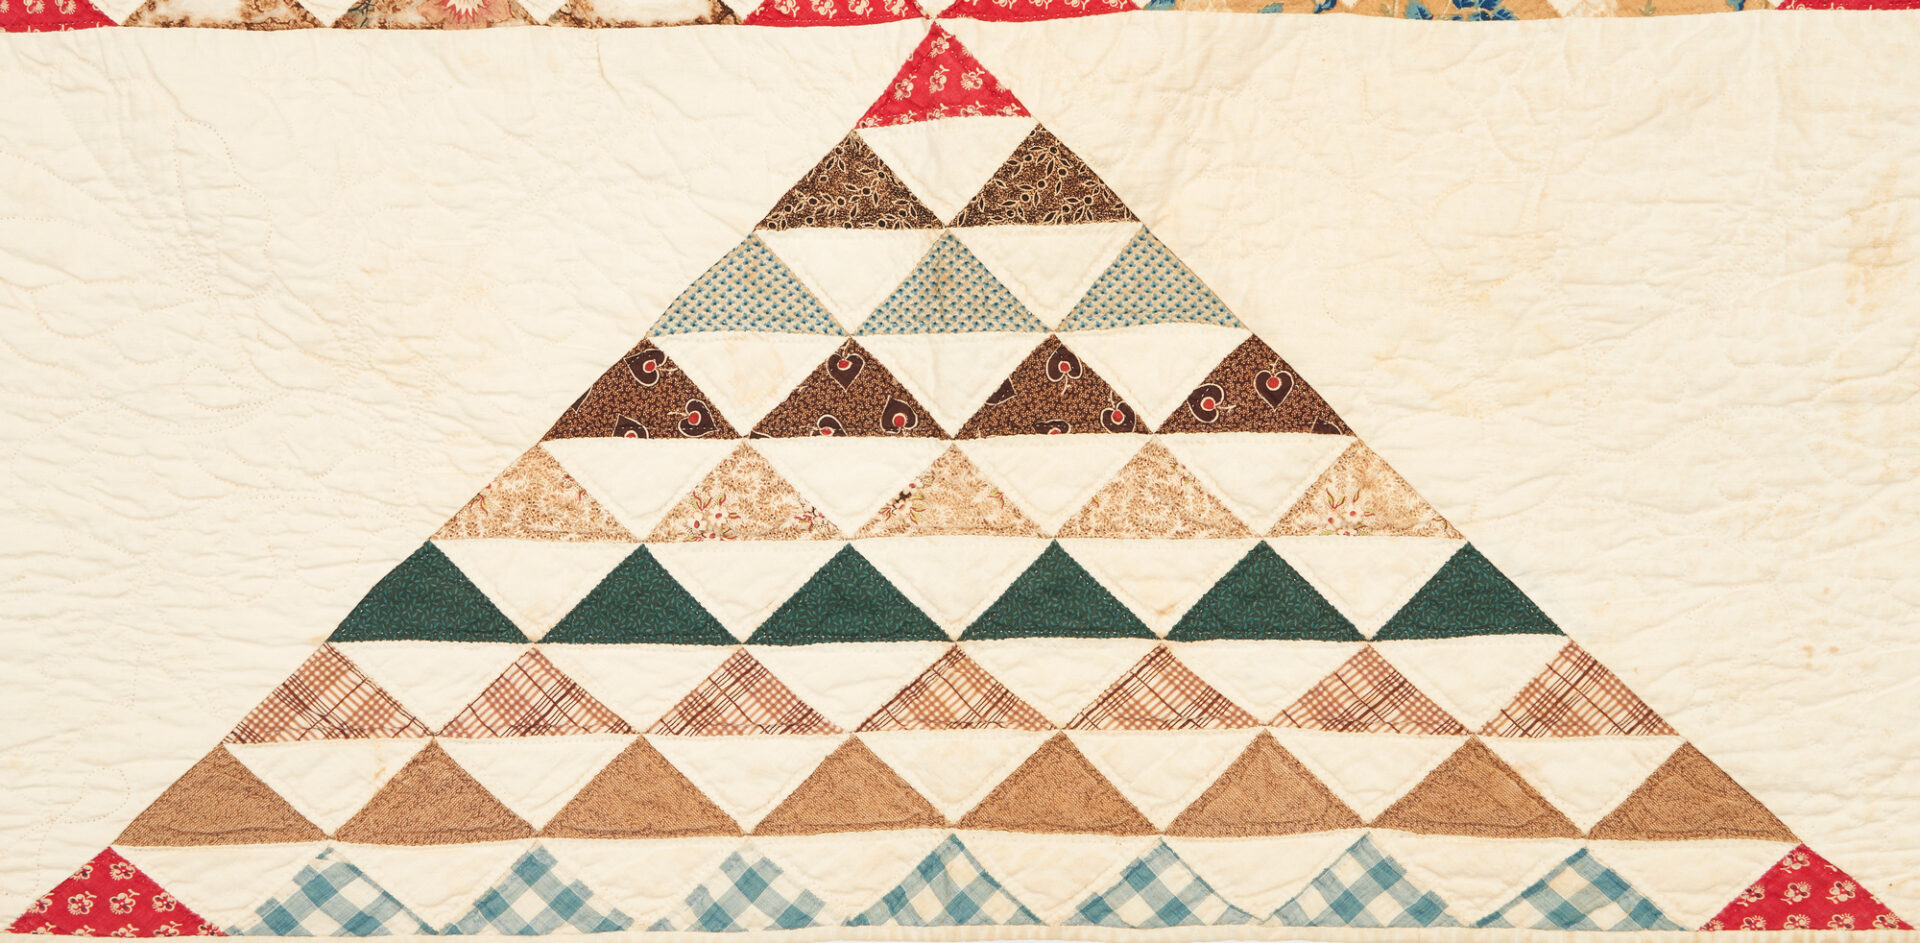 Lot 942: American Eight Pointed Star Quilt, 1840s